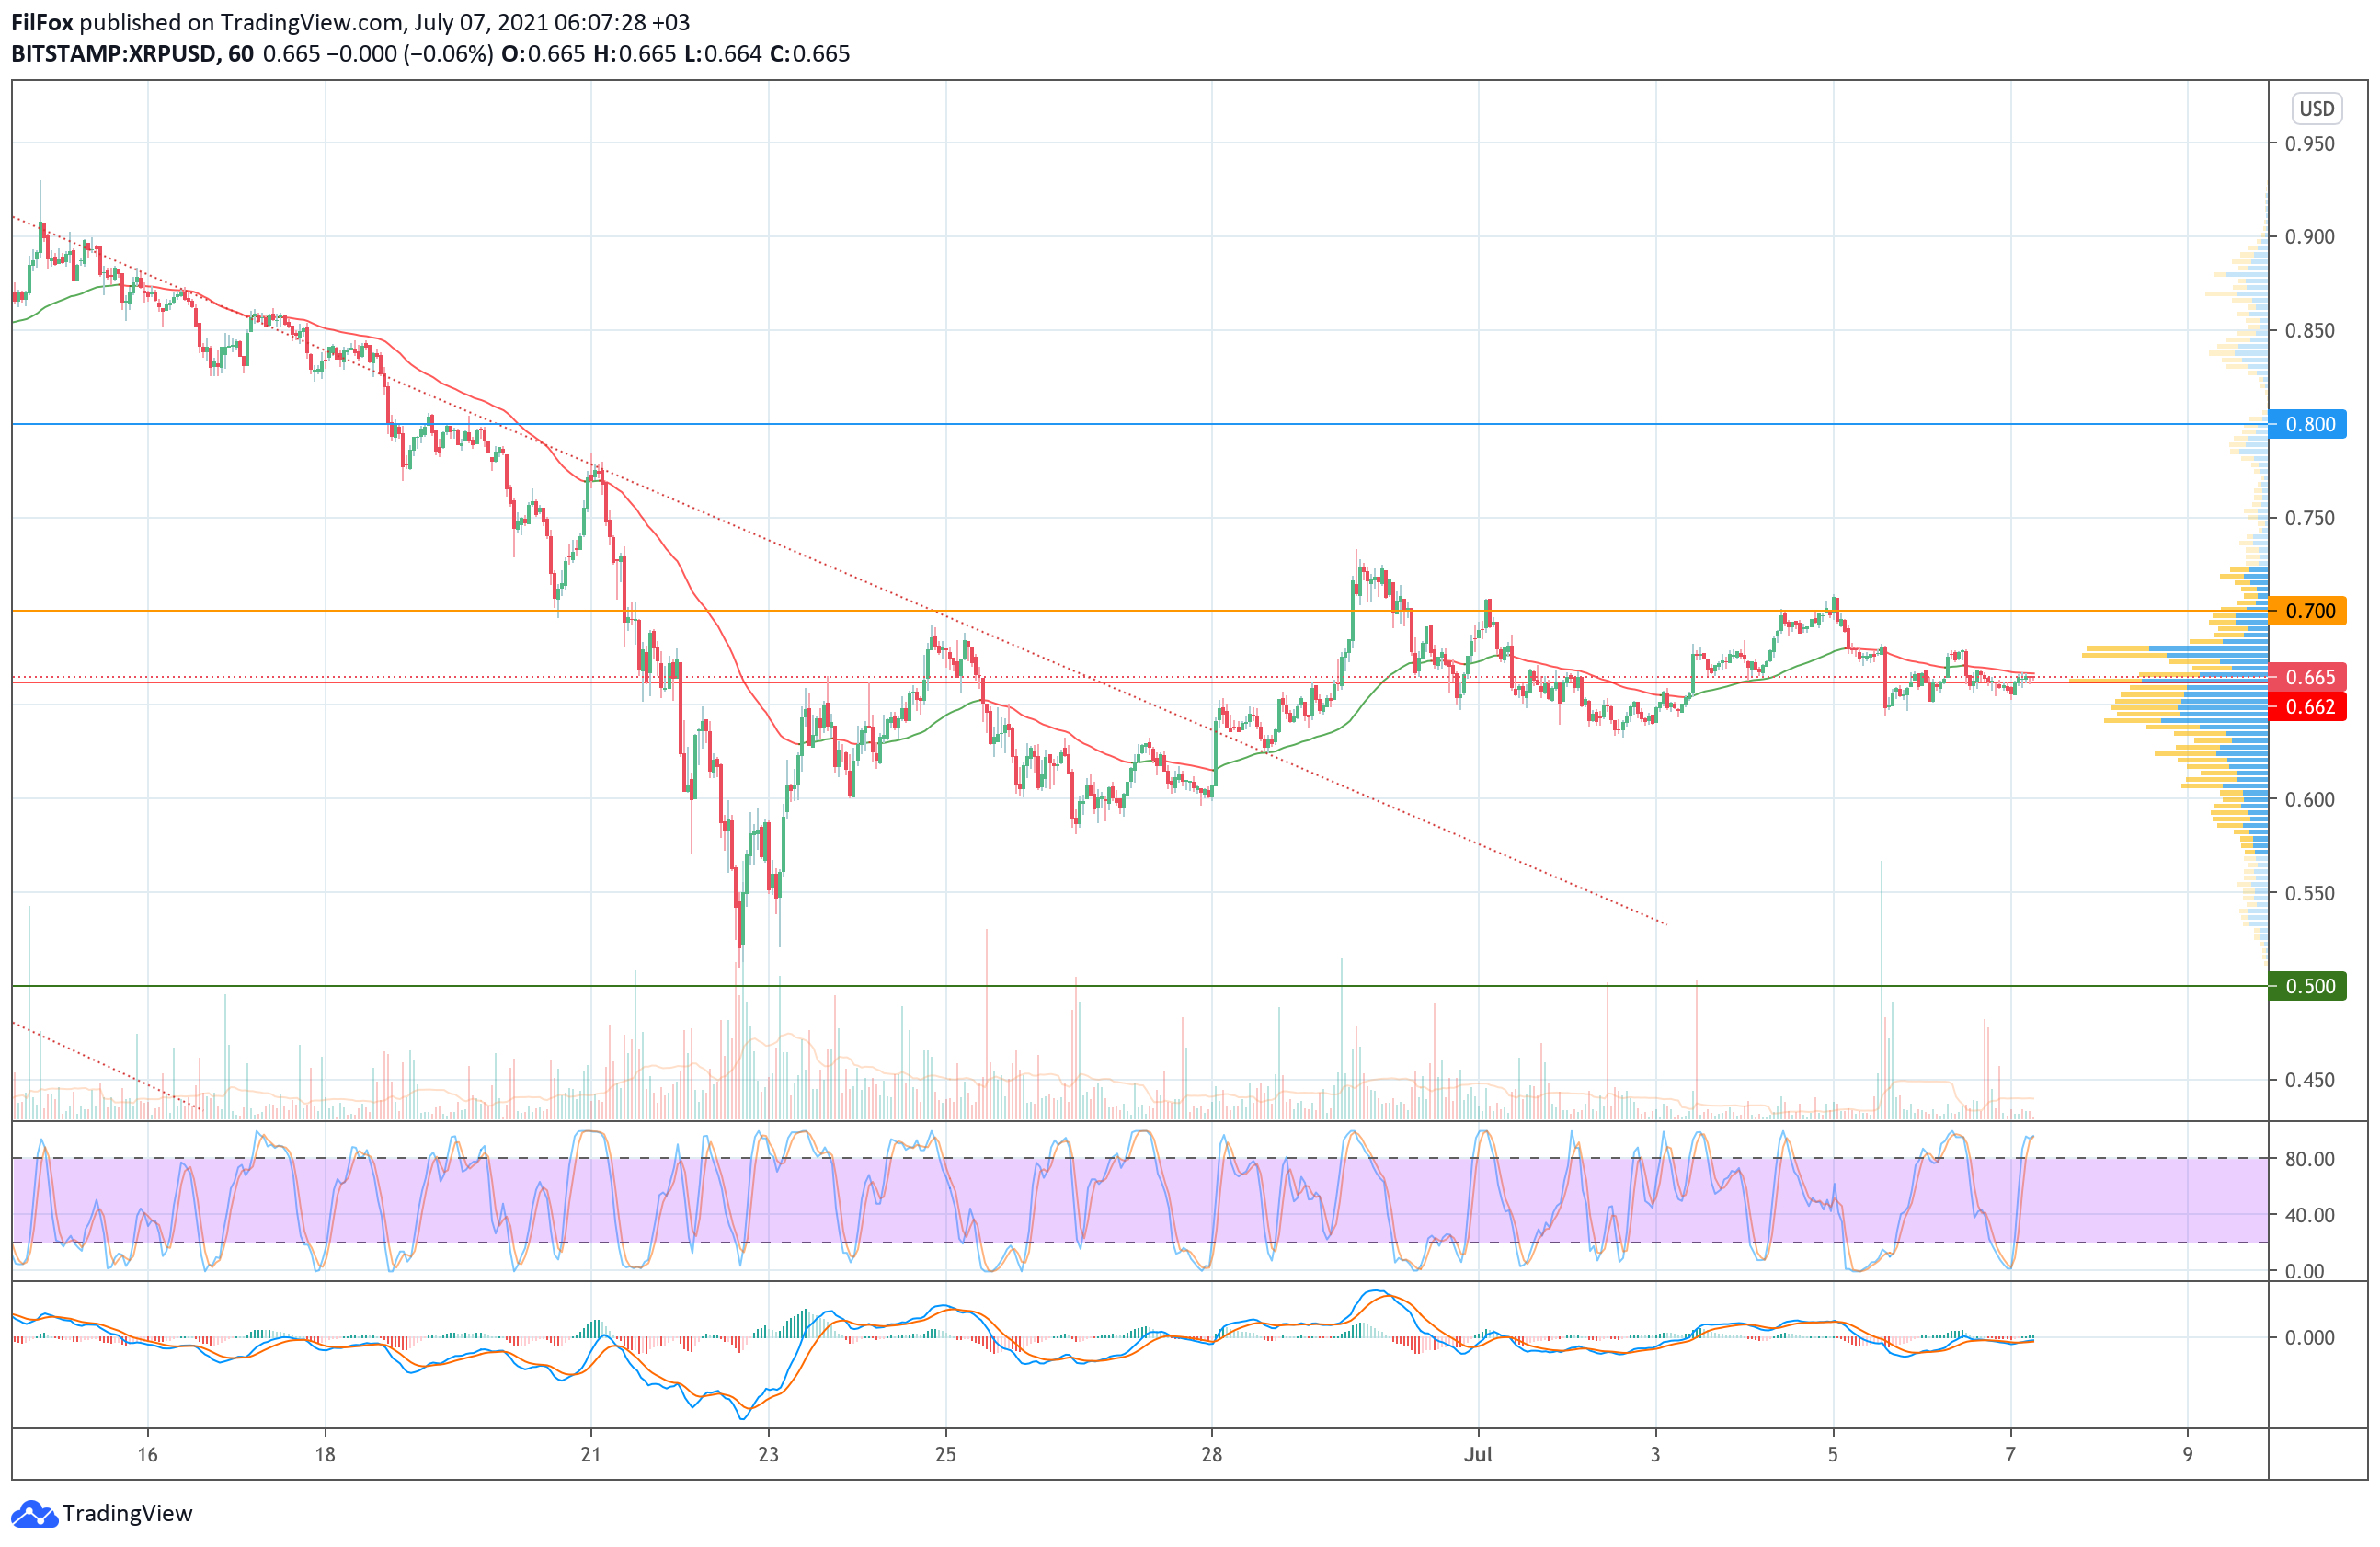 Analysis of the prices of Bitcoin, Ethereum, XRP for 07/07/2021